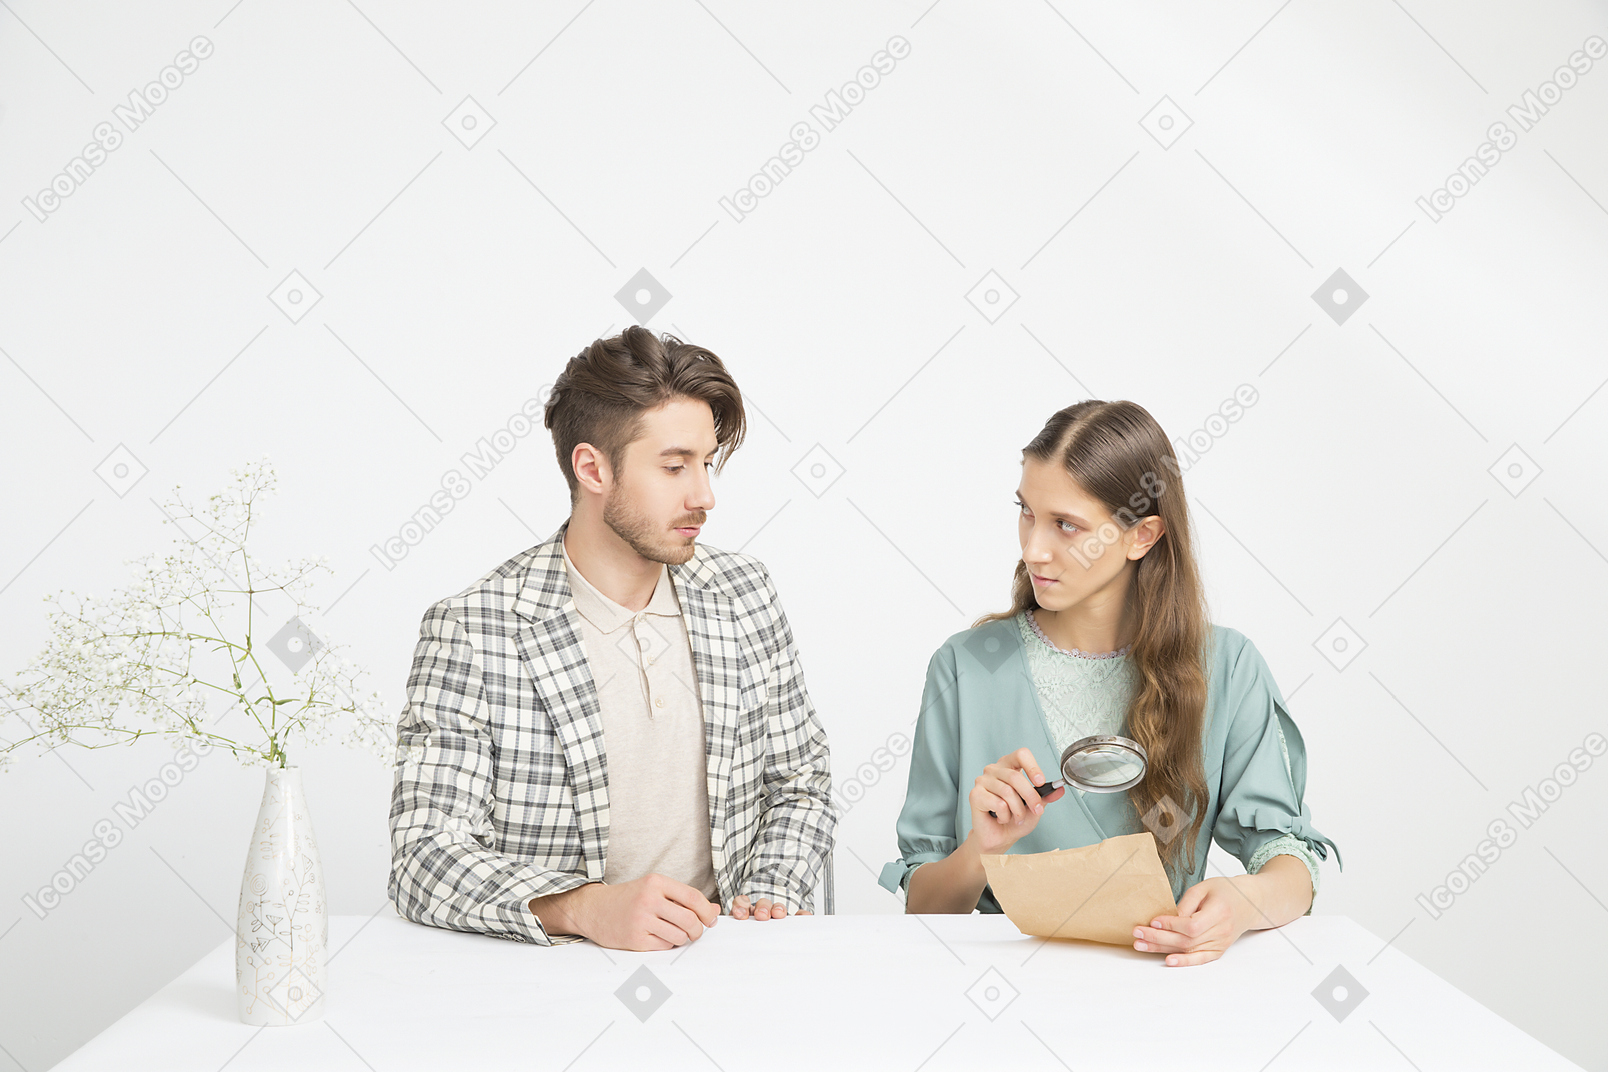 Couple sitting at the table and investigating a paper